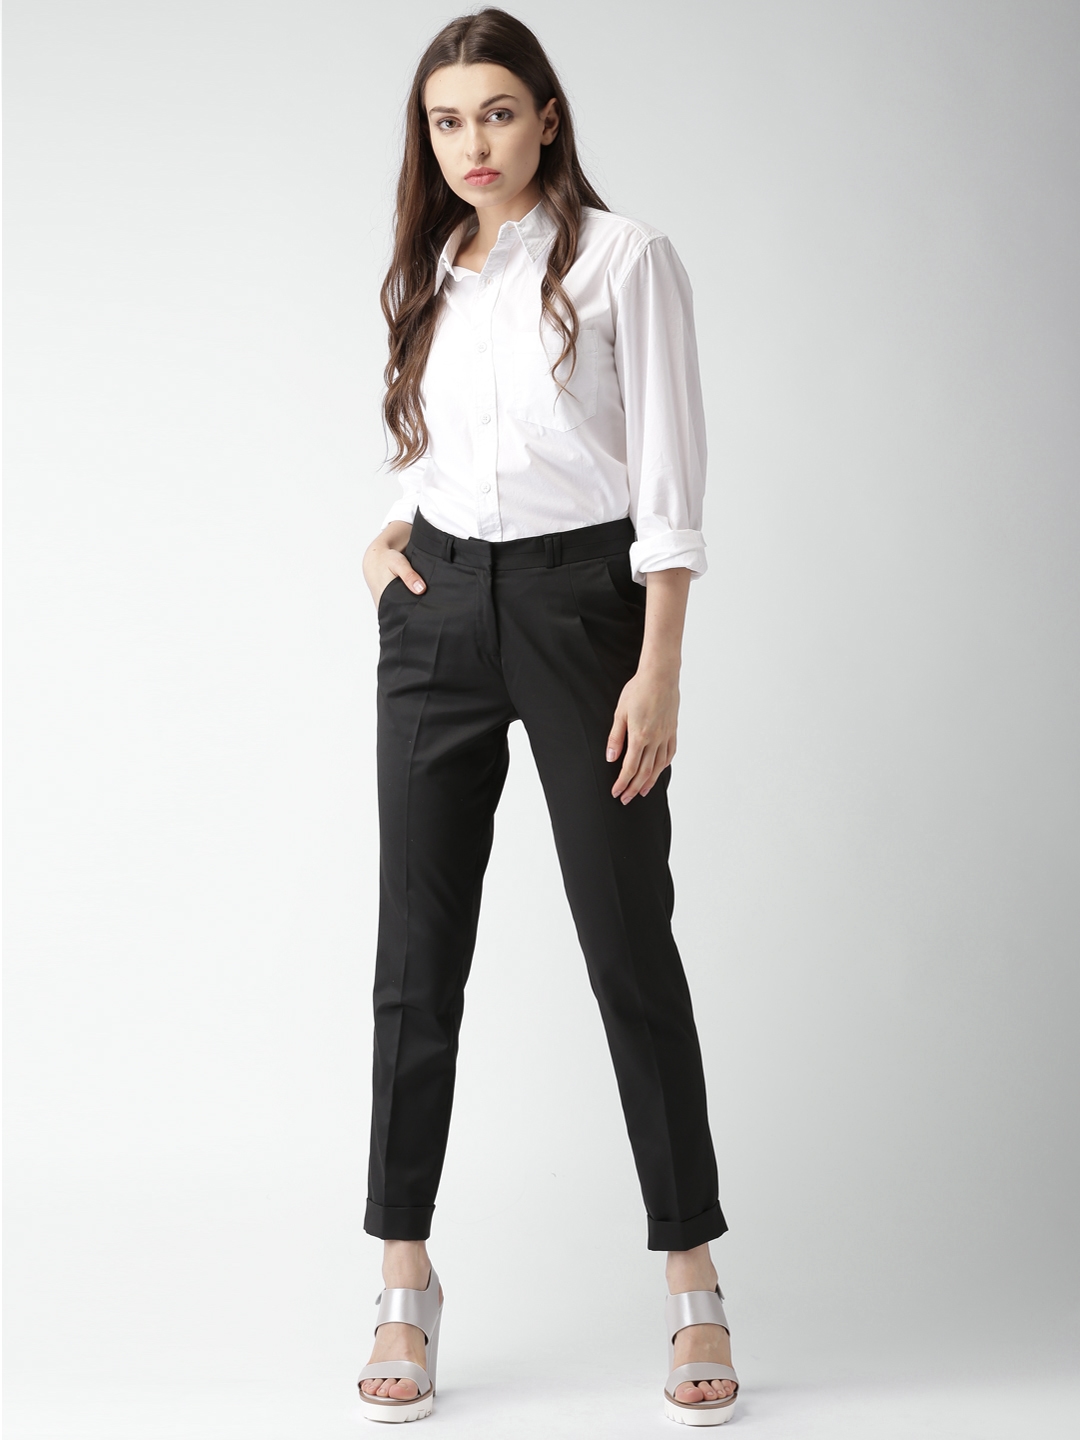 Update more than 147 formal trousers for women best